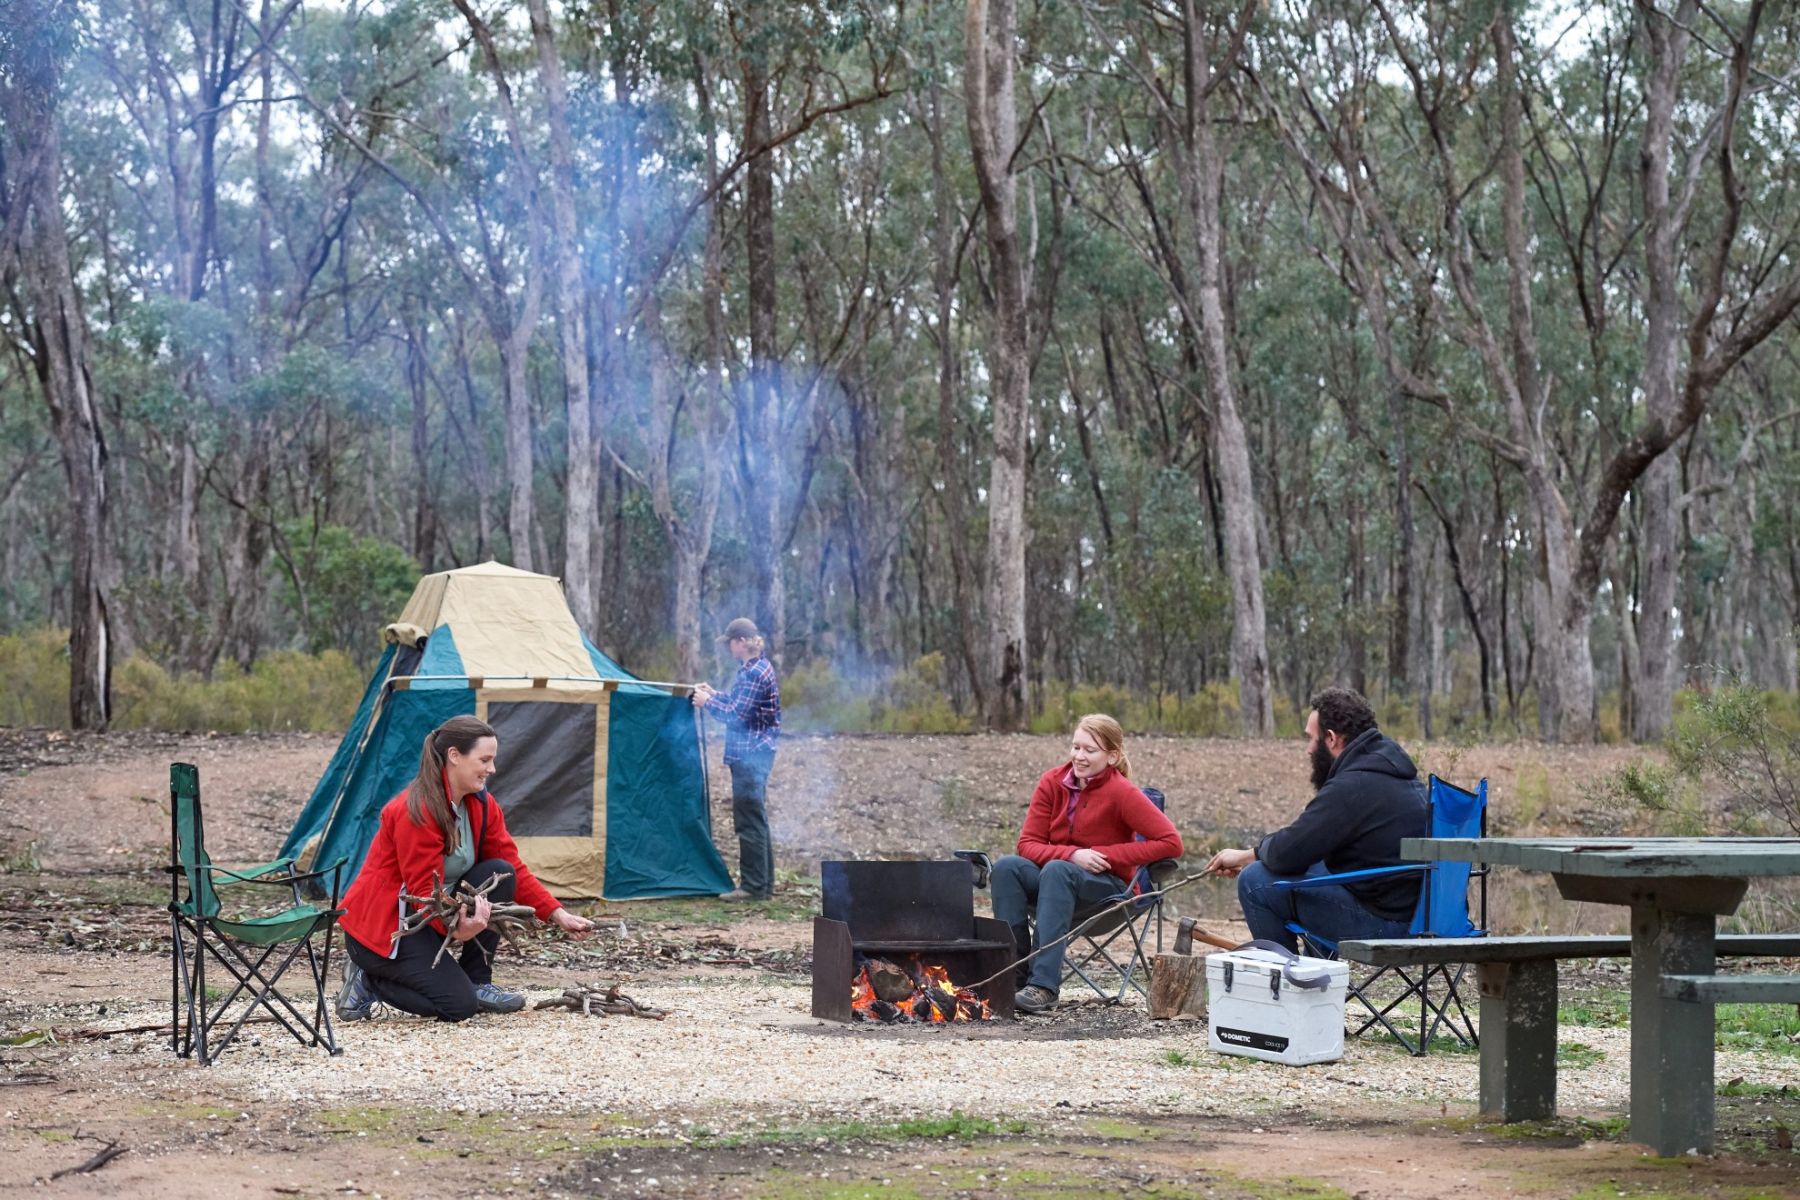 A group of friends sit in front of a tent in the bush.